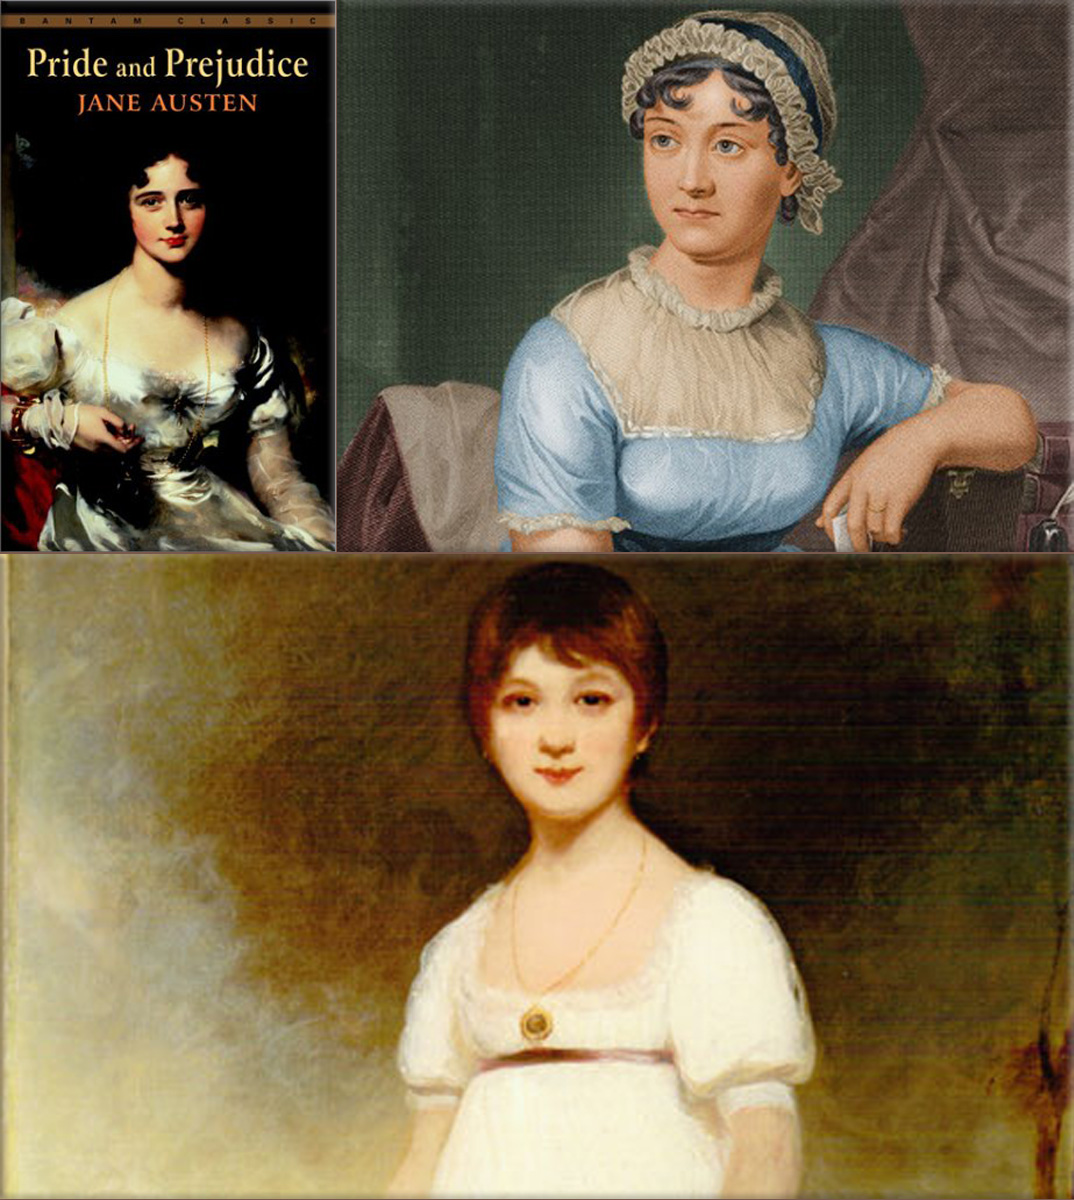 Pride and Prejudice: Jane Austen, Portrait on canvas dating 1910, depicting a young girl, believed to be Jane Austen